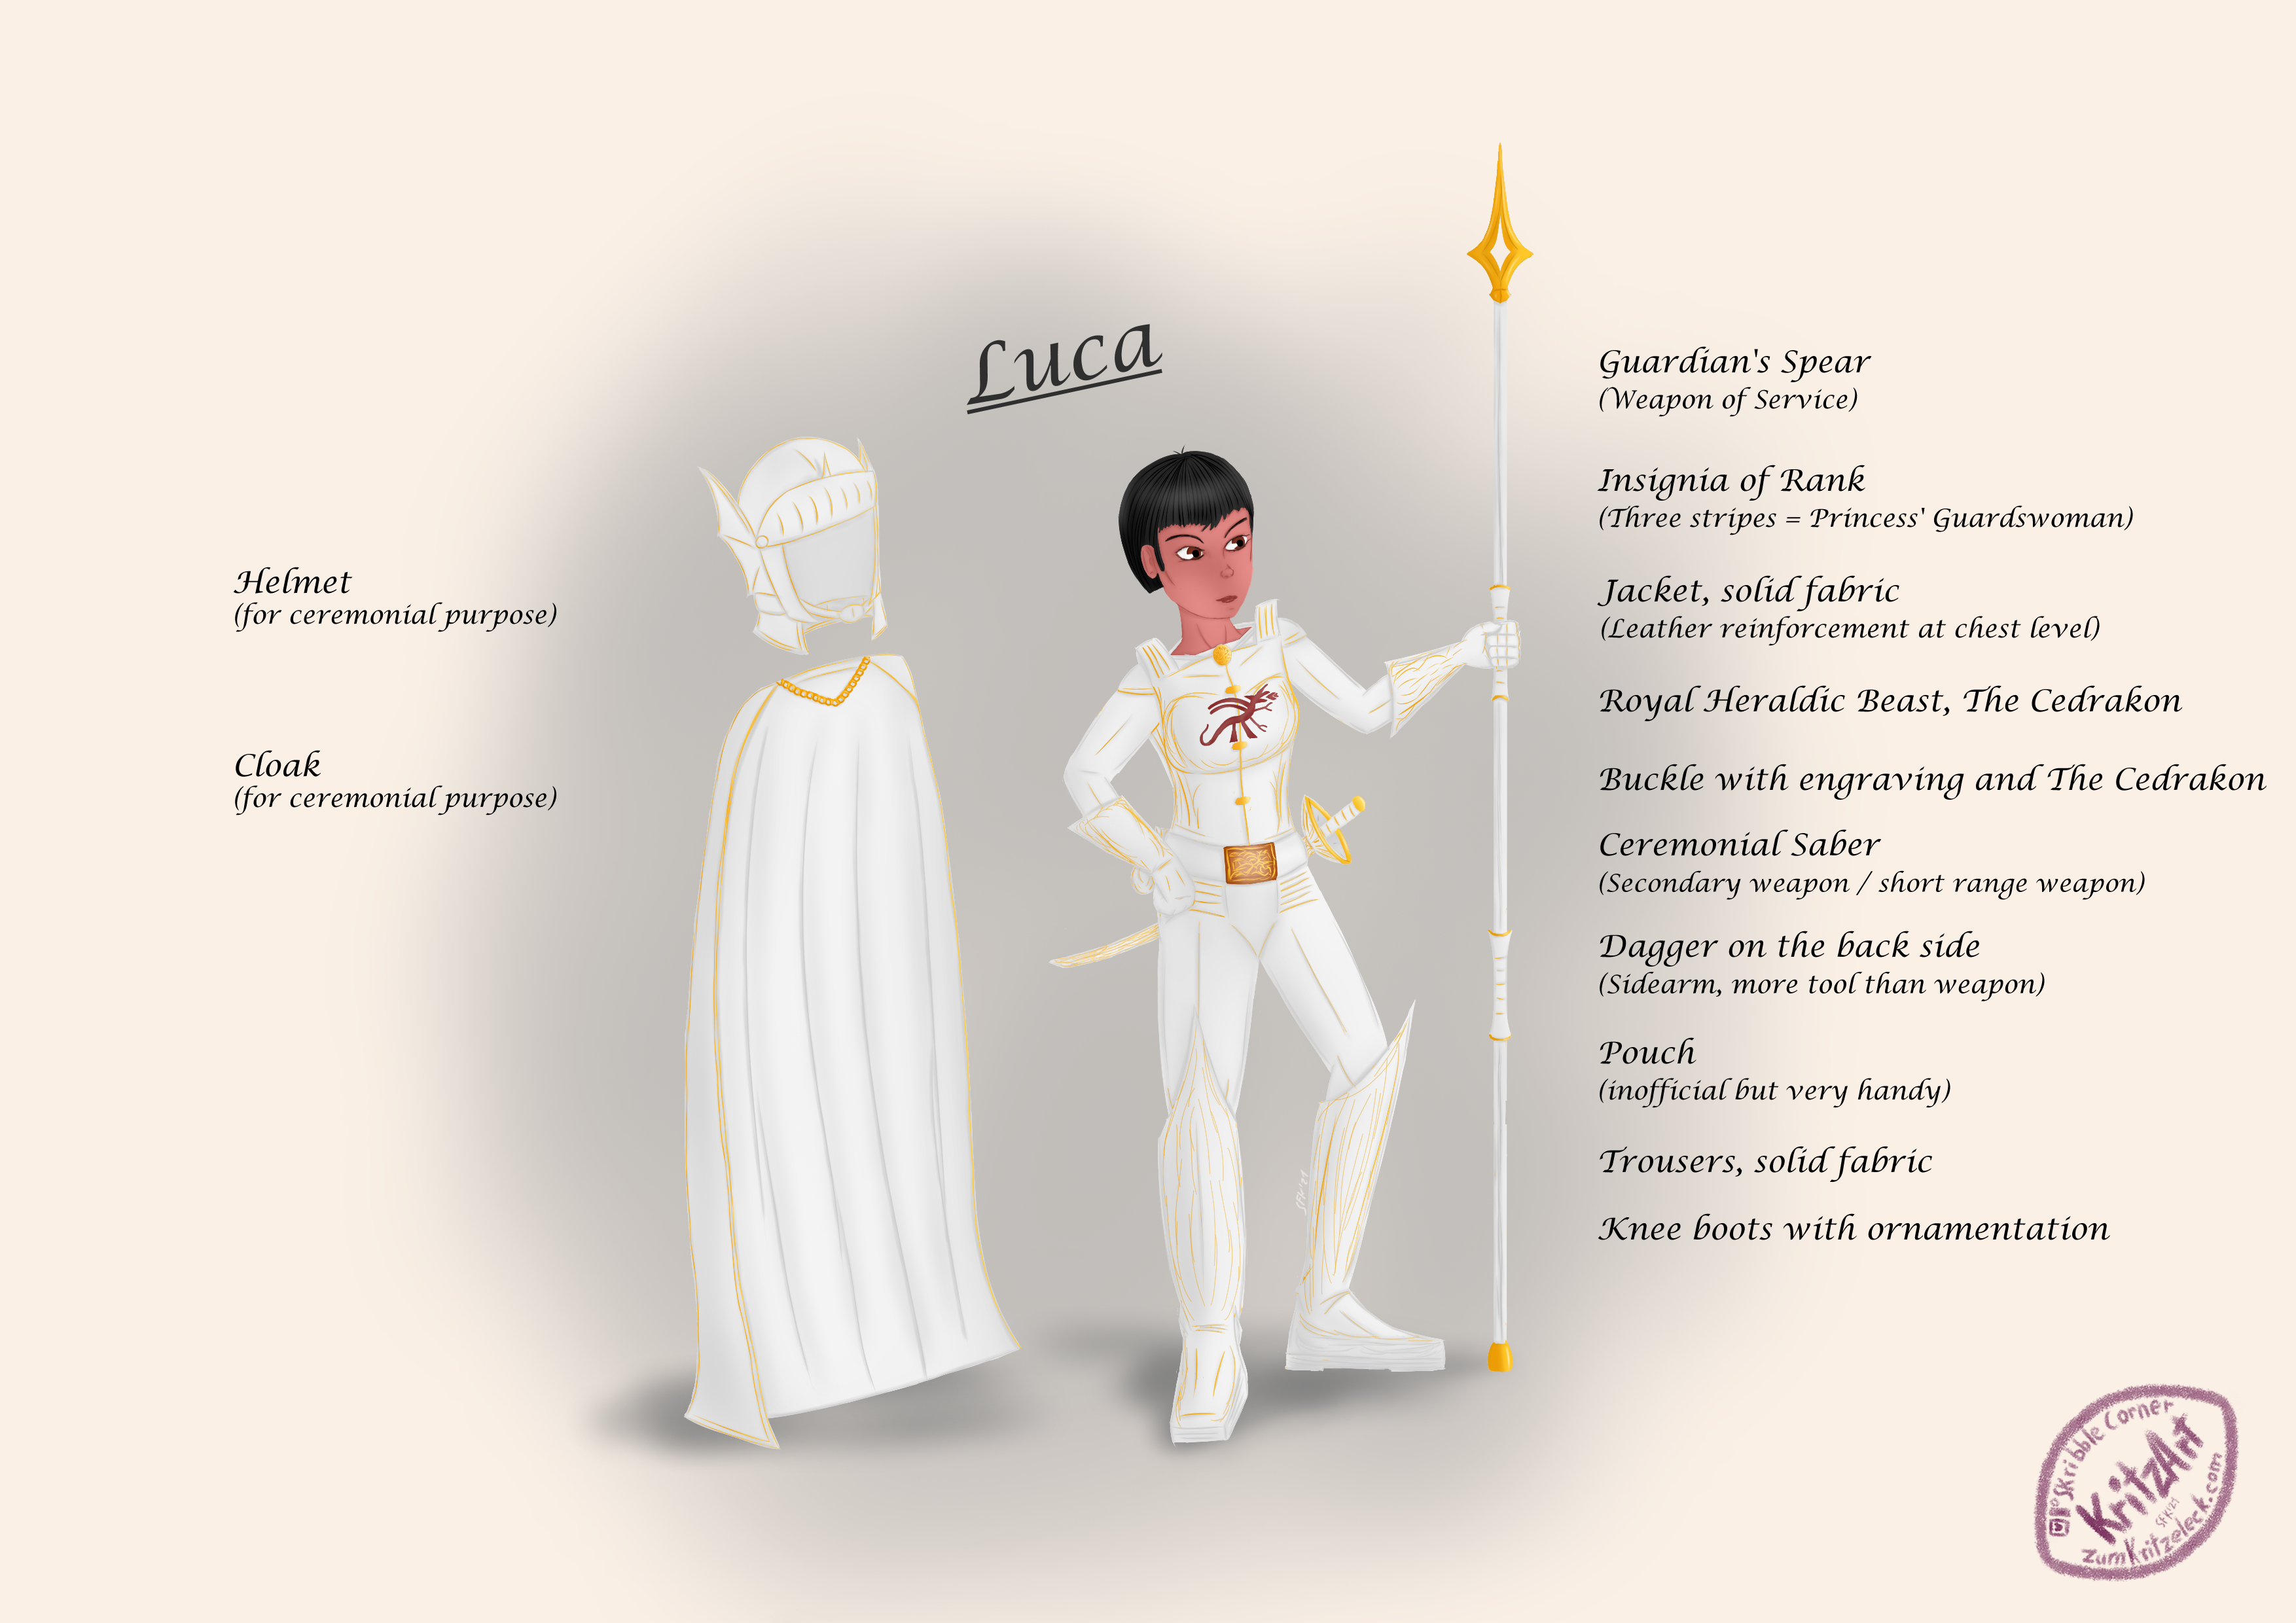 Digital Painting, comic style, washy grey background on light paper: "Luca", a young woman with short black hair, holding a white spear with the left hand, wearing a white uniform, on the chest a red dragonlike figure, on the belt at her left side a saber, on her right side a pouche, she also is wearing big ornamented knee boots; on the left side of the painting an empty white helmet with dragon wings as ears and a white cloak, all the clothings are ornamented with gold; descriptive textes (right side) Guardian's Spear (Weapon of Service); Insignia of Rank (Three stripes = Princess' Guardswoman); Jacket, solid fabric (Leather reinforcement at chest level); Royal Heraldic Beast, The Cedrakon; Buckle with engraving and The Cedrakon; Ceremonial Saber (Secondary weapon / short range weapon); Dagger on the back side (Sidearm weapon, more tool than weapon); Pouch (unofficial but very handy); Trousers, solid fabric; Knee boots with ornamentation; (left side) Helmet (for ceremonial purpose); Cloak (for ceremonial purpose)